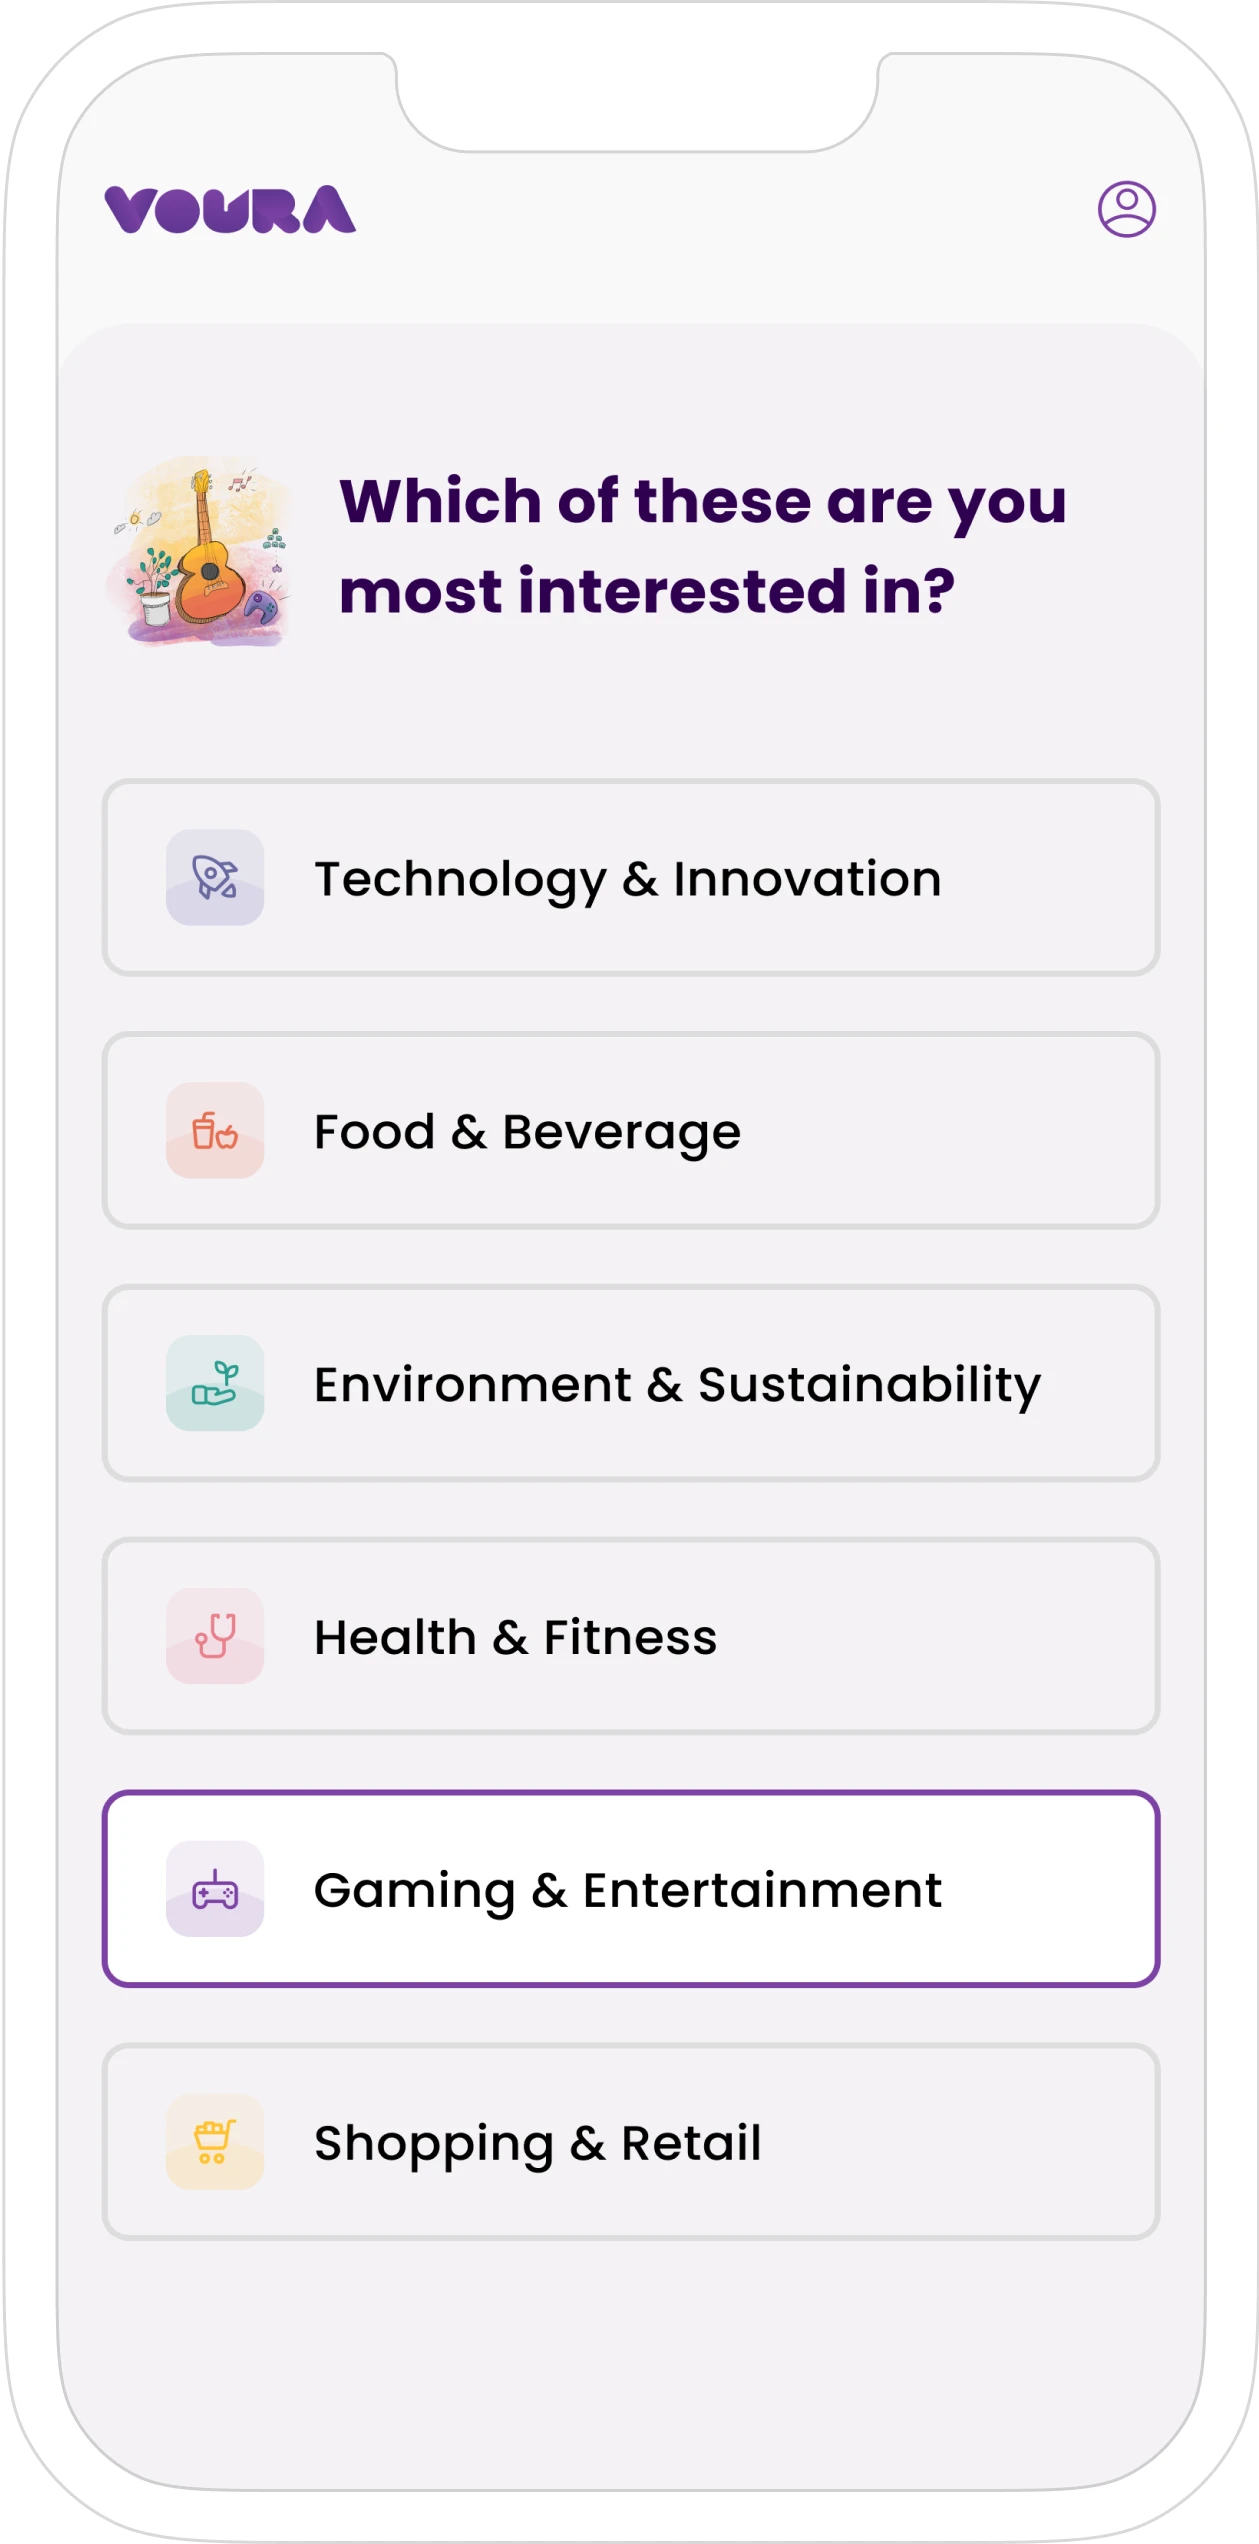 Mobile phone with Voura app onboarding screen showing question: 'Which of these are you most interested in?', followed by options 'Technology & Innovation', 'Food & Beverage', 'Environment & Sustainability', 'Health & Fitness', 'Gaming & Entertainment' and 'Shopping & Retail'.